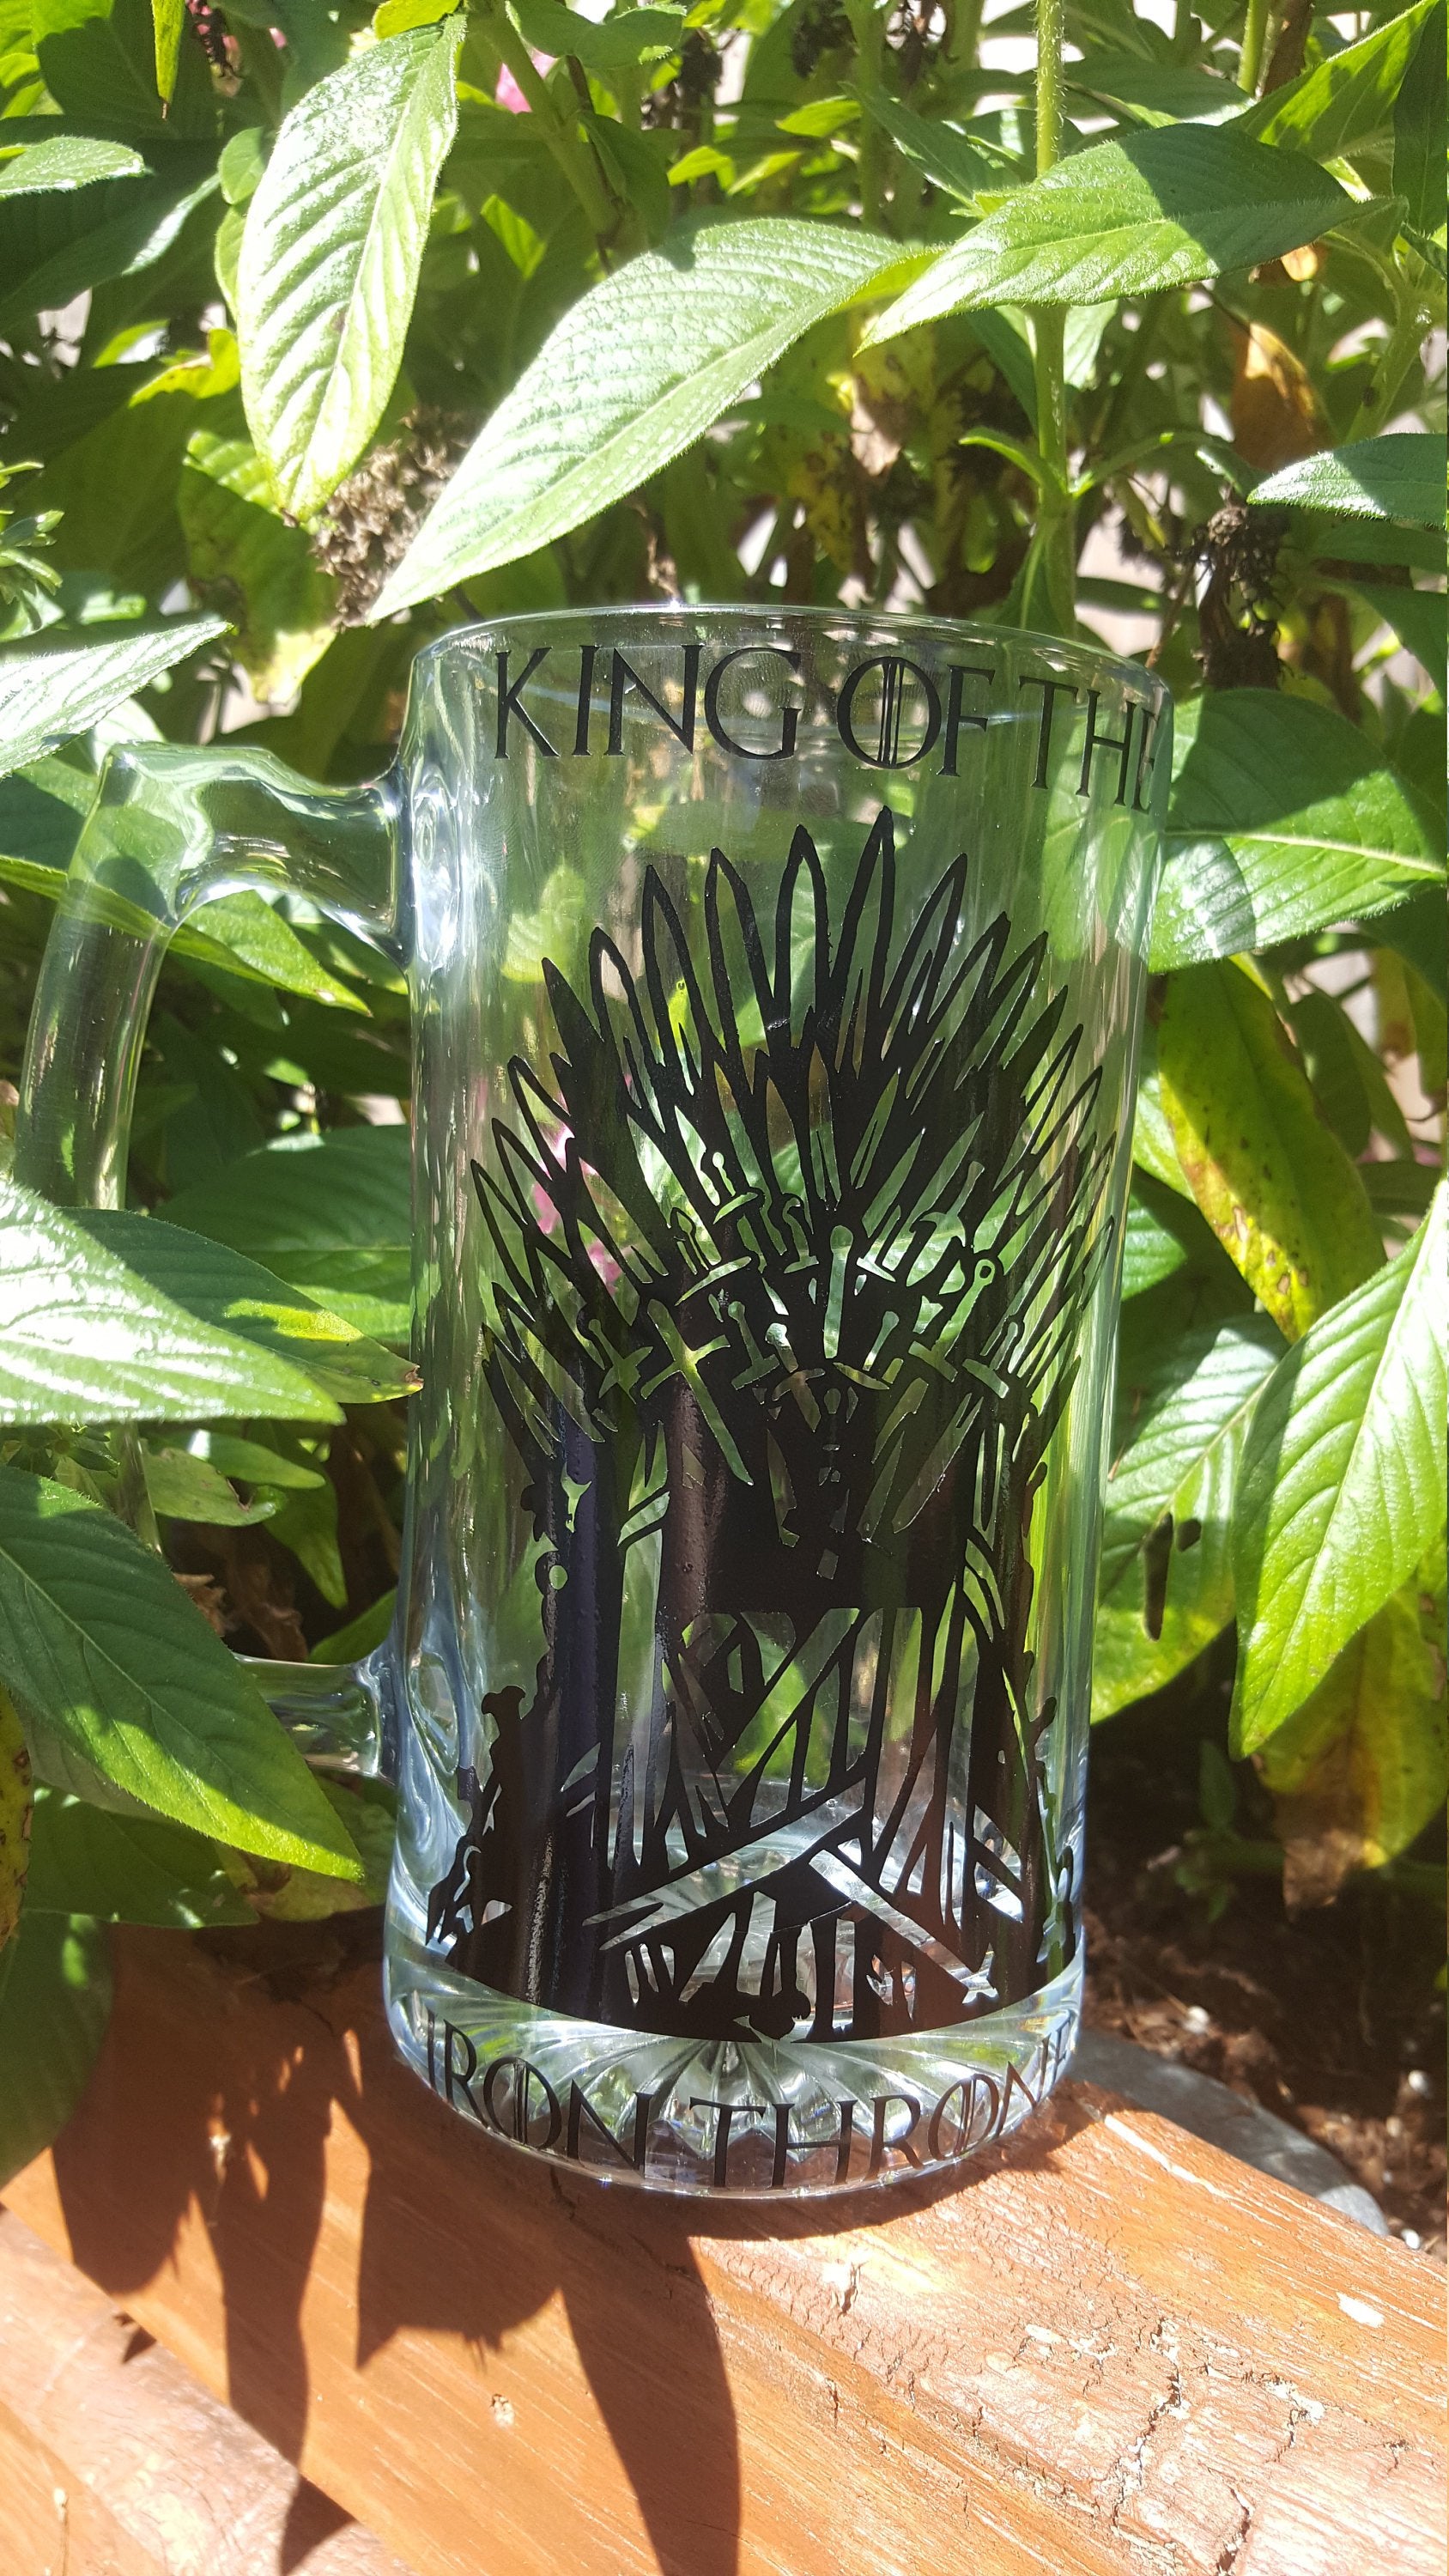 Game of Thrones Beer Mug, Iron throne, Personalized, Grooms Gift, Valentines Gift, Gift for him - CCCreationz